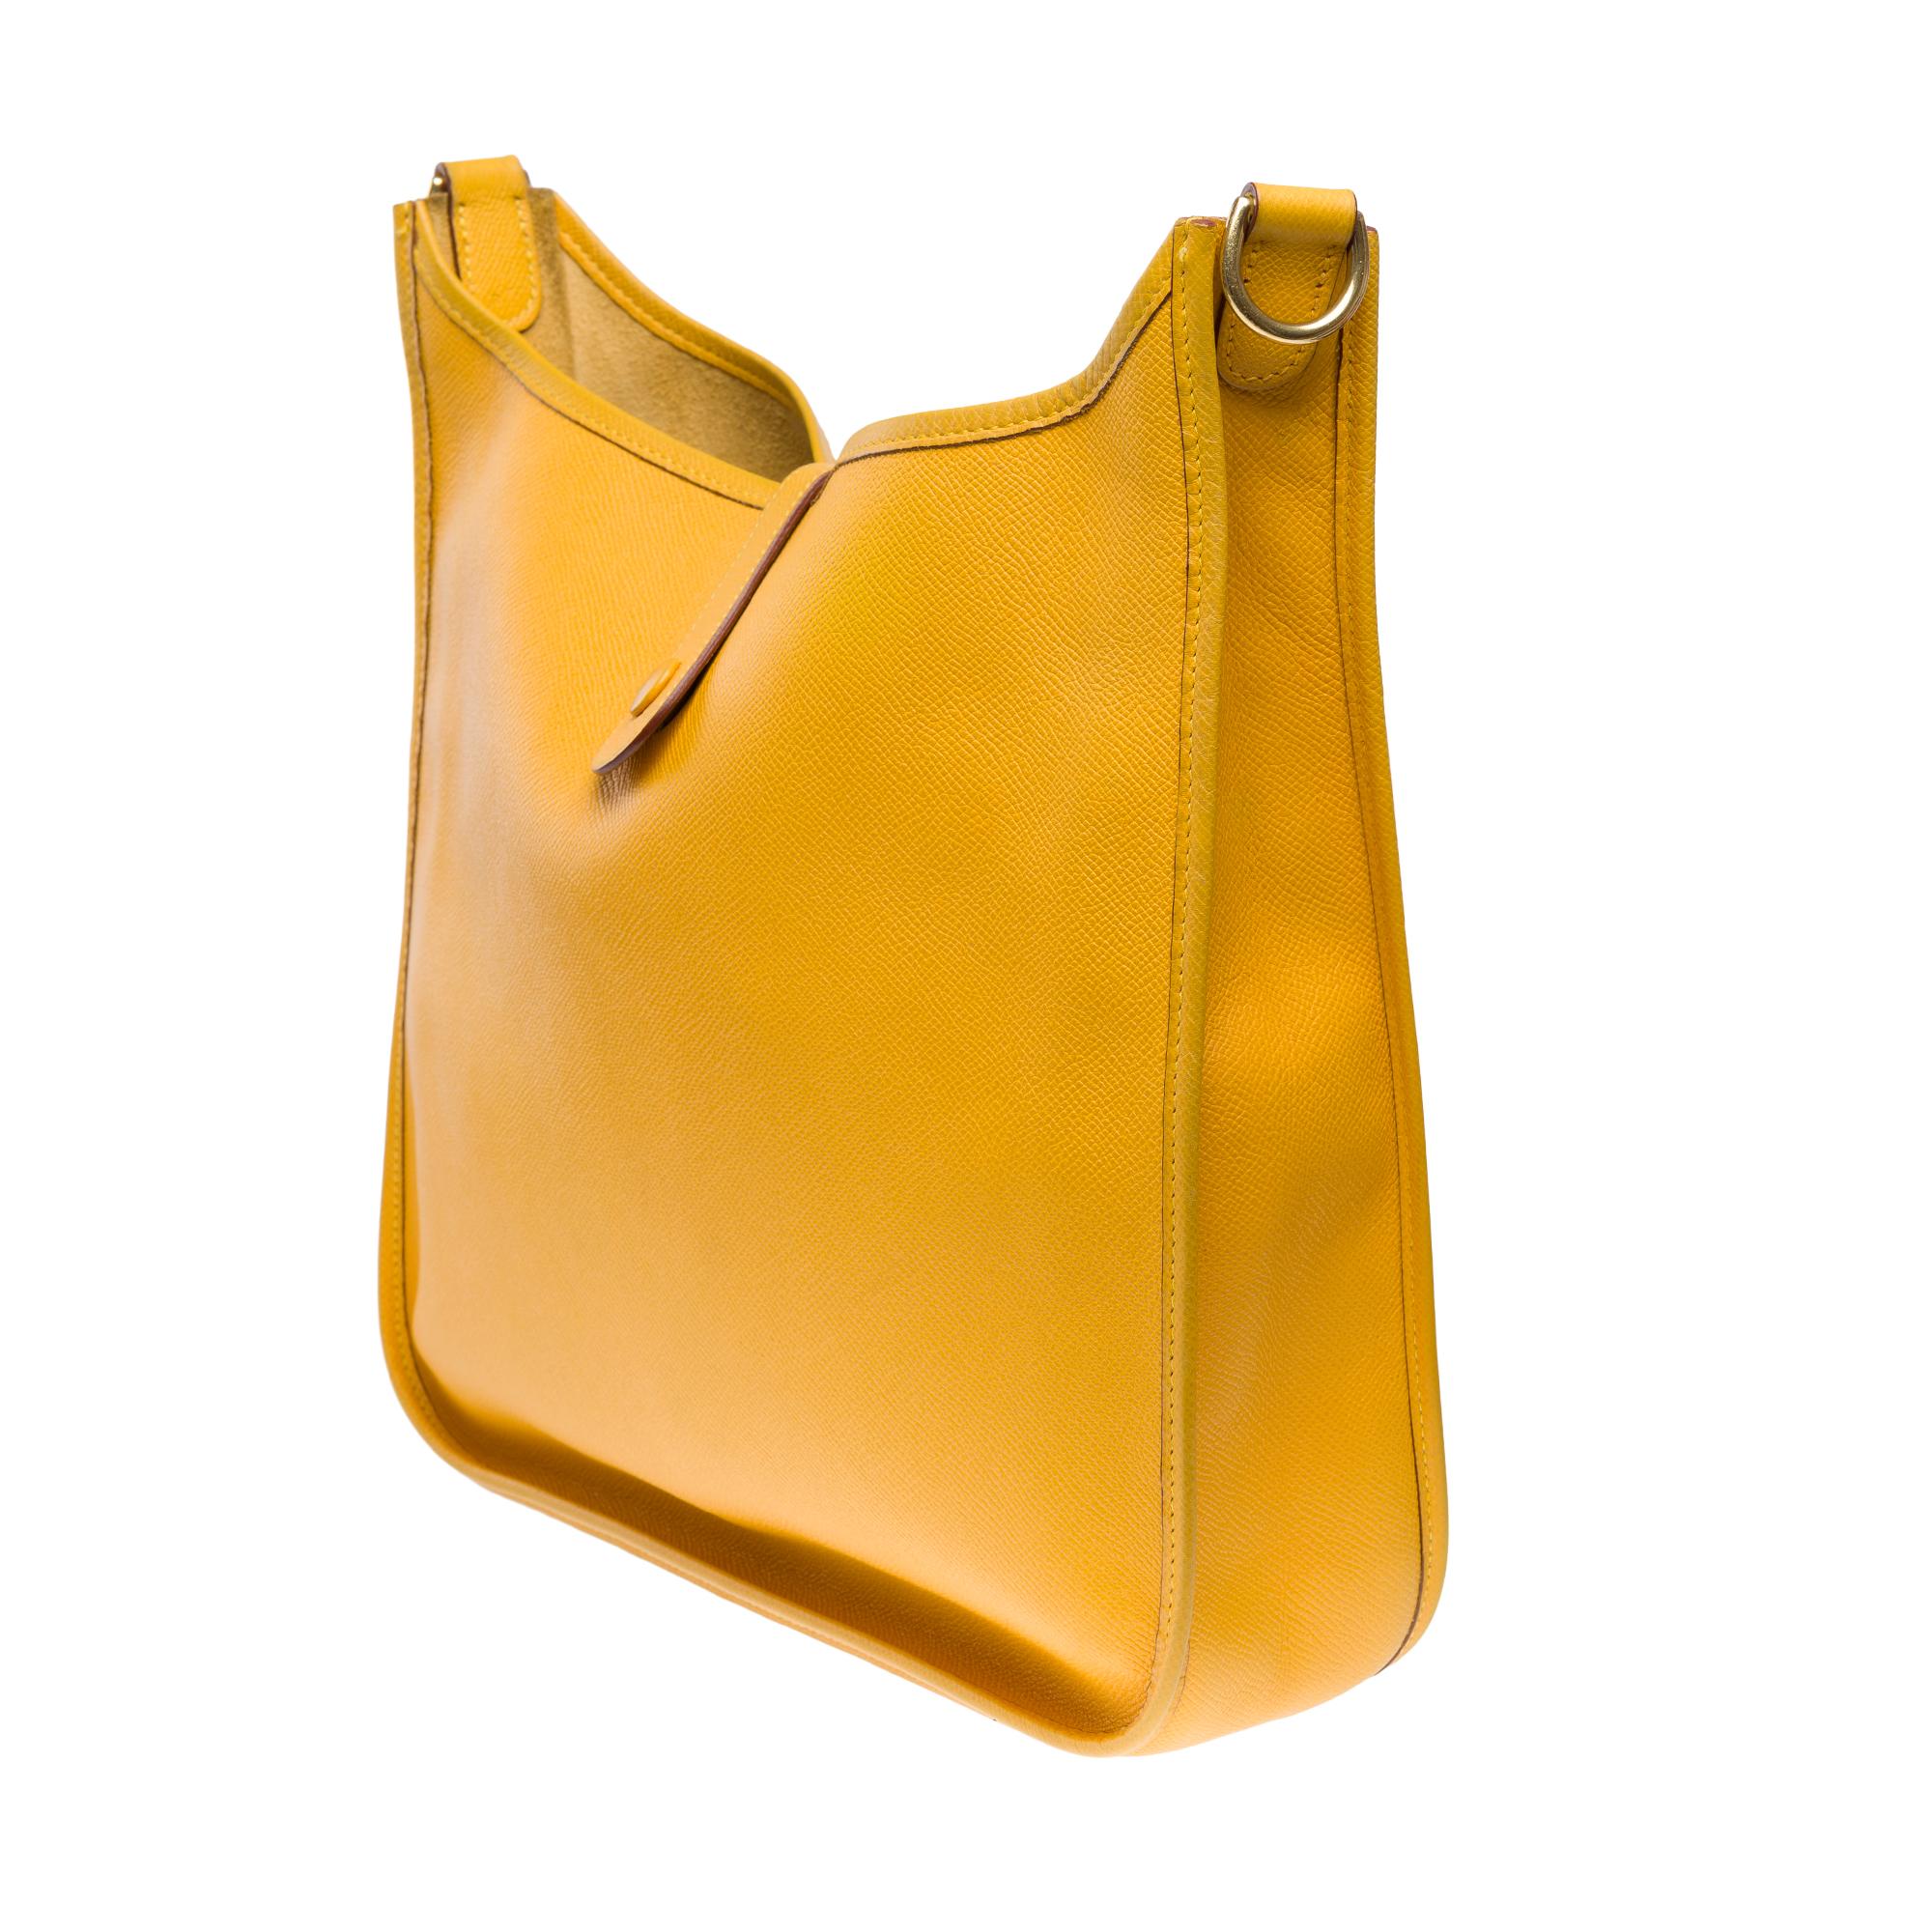 Hermès Evelyne 33 (GM)  shoulder bag in Yellow Gold Courchevel leather, GHW 1